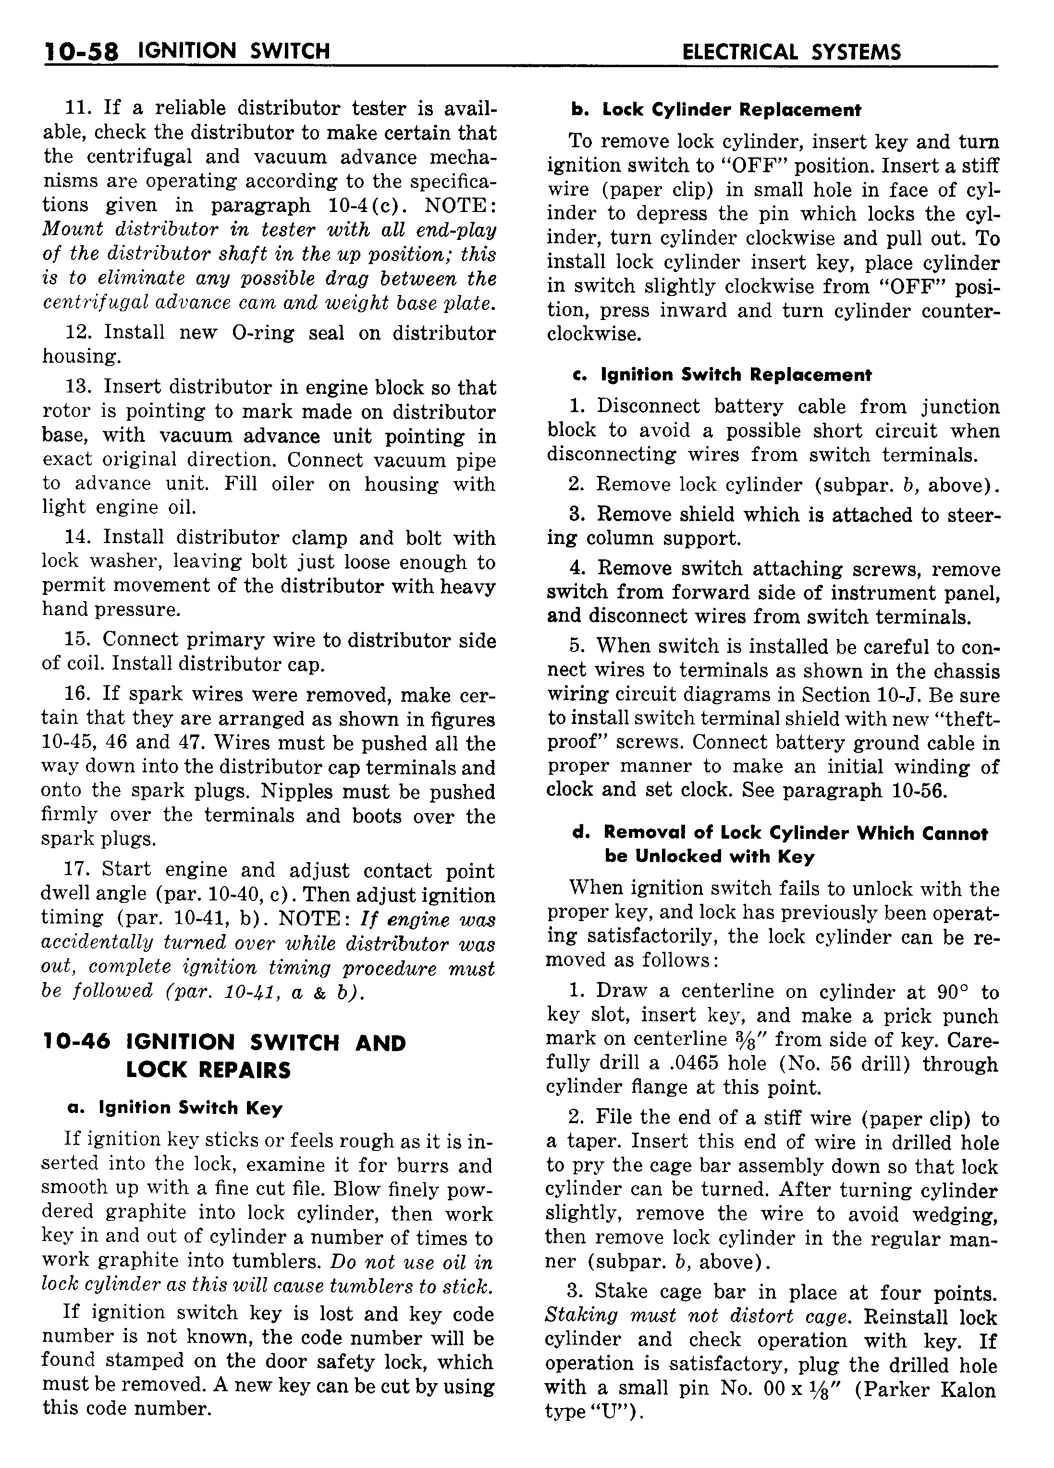 n_11 1957 Buick Shop Manual - Electrical Systems-058-058.jpg